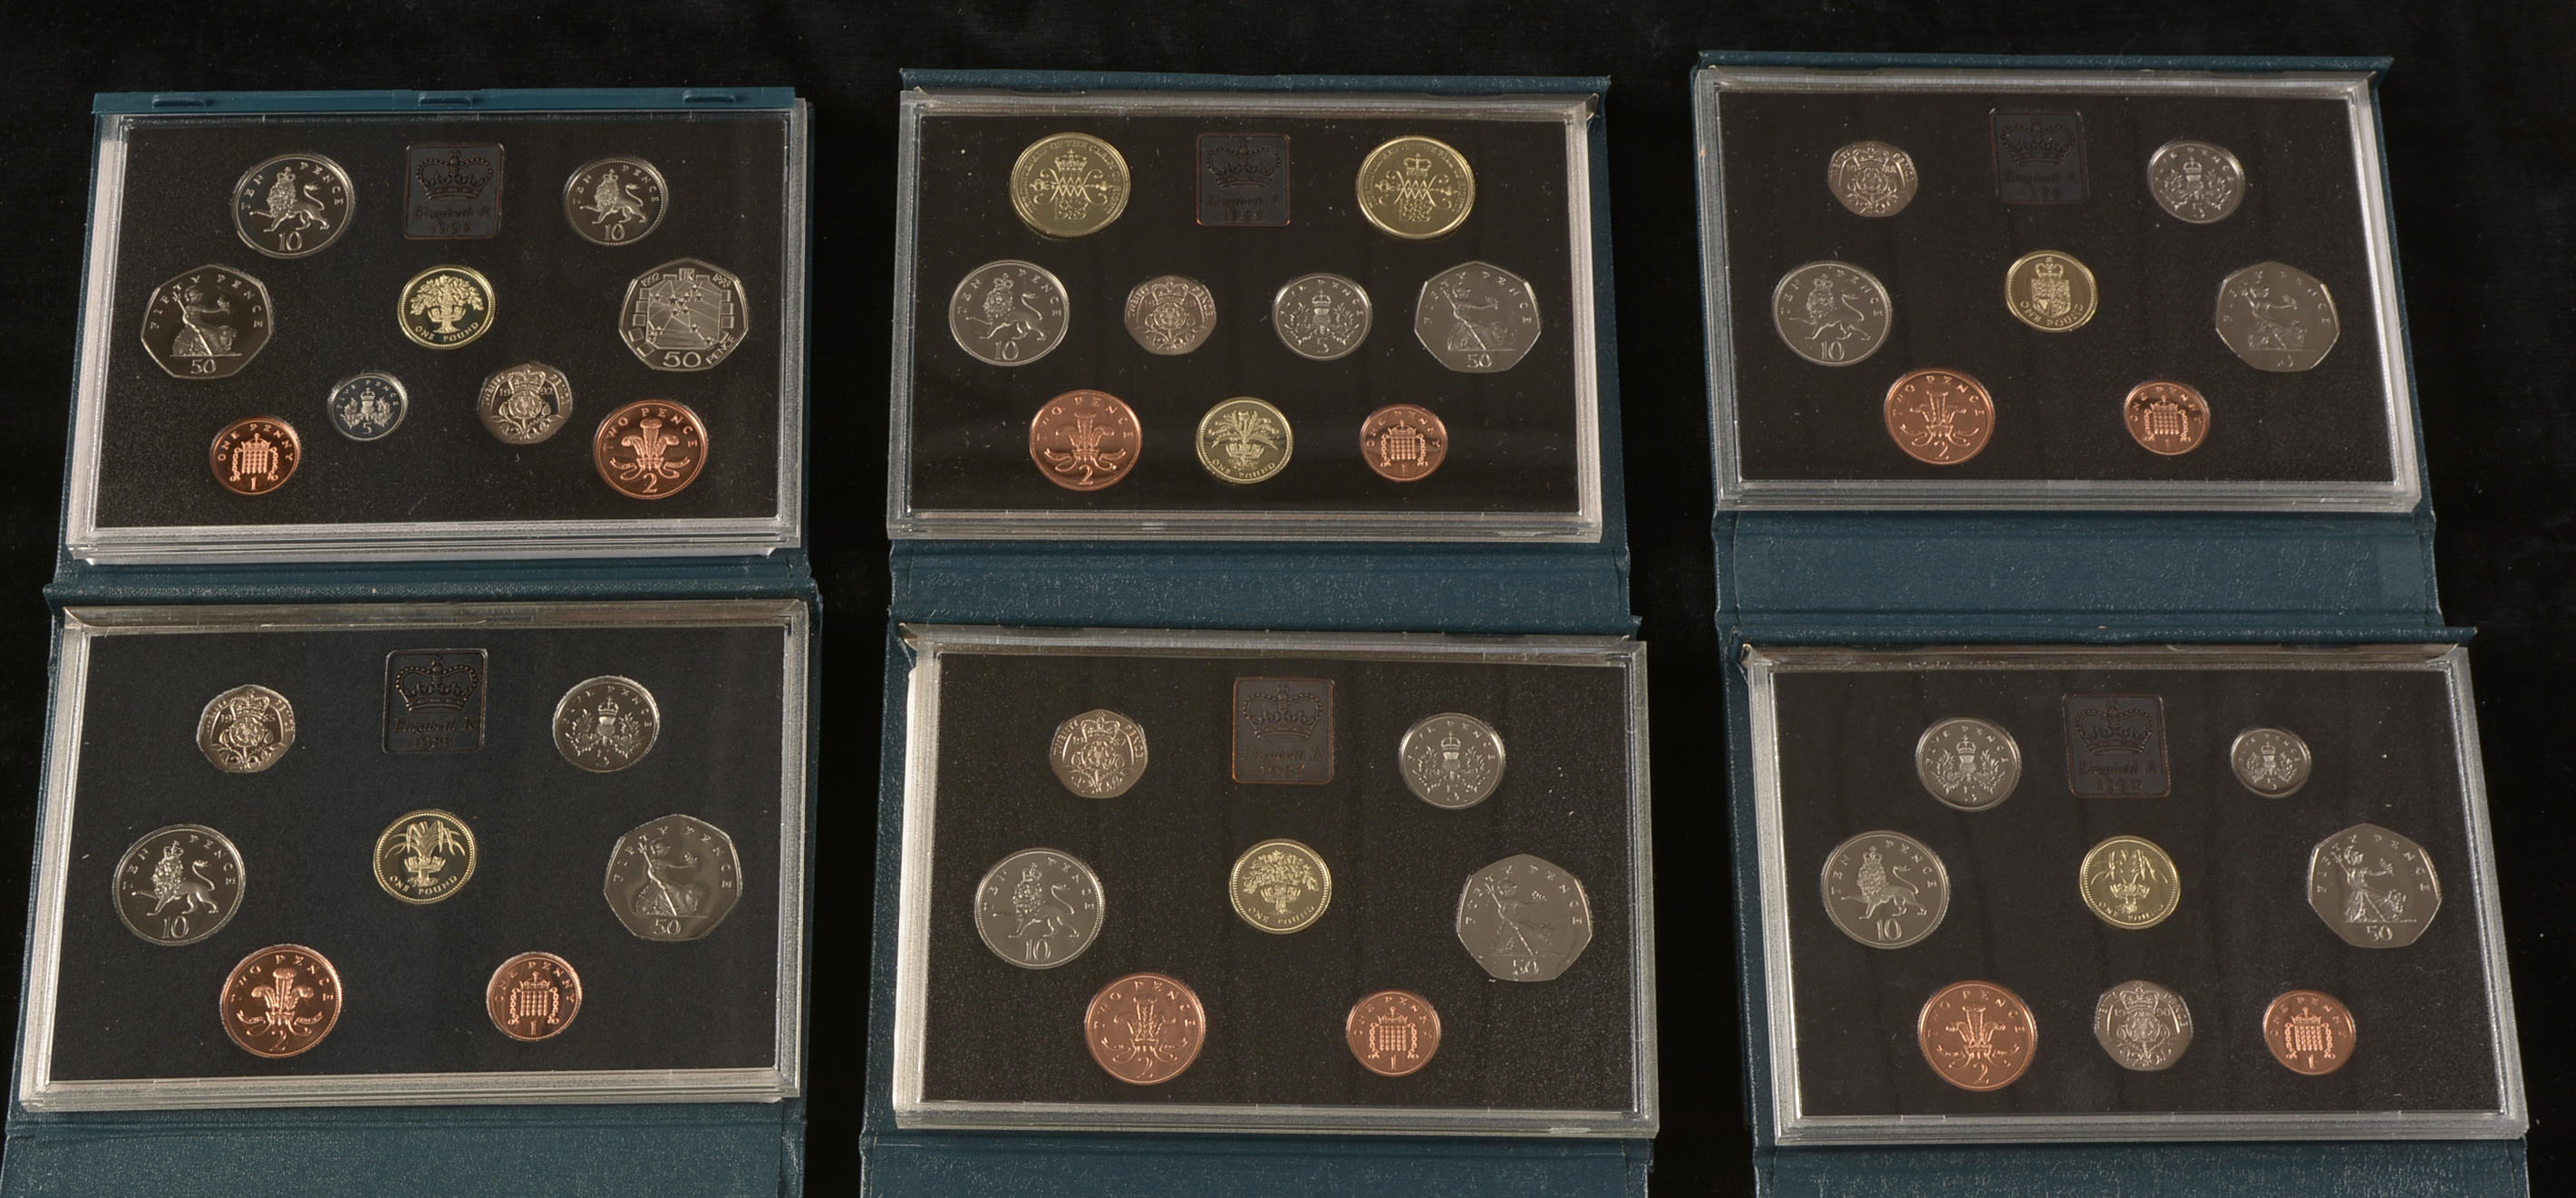 GB Royal Mint proof sets and other coins - Image 5 of 7